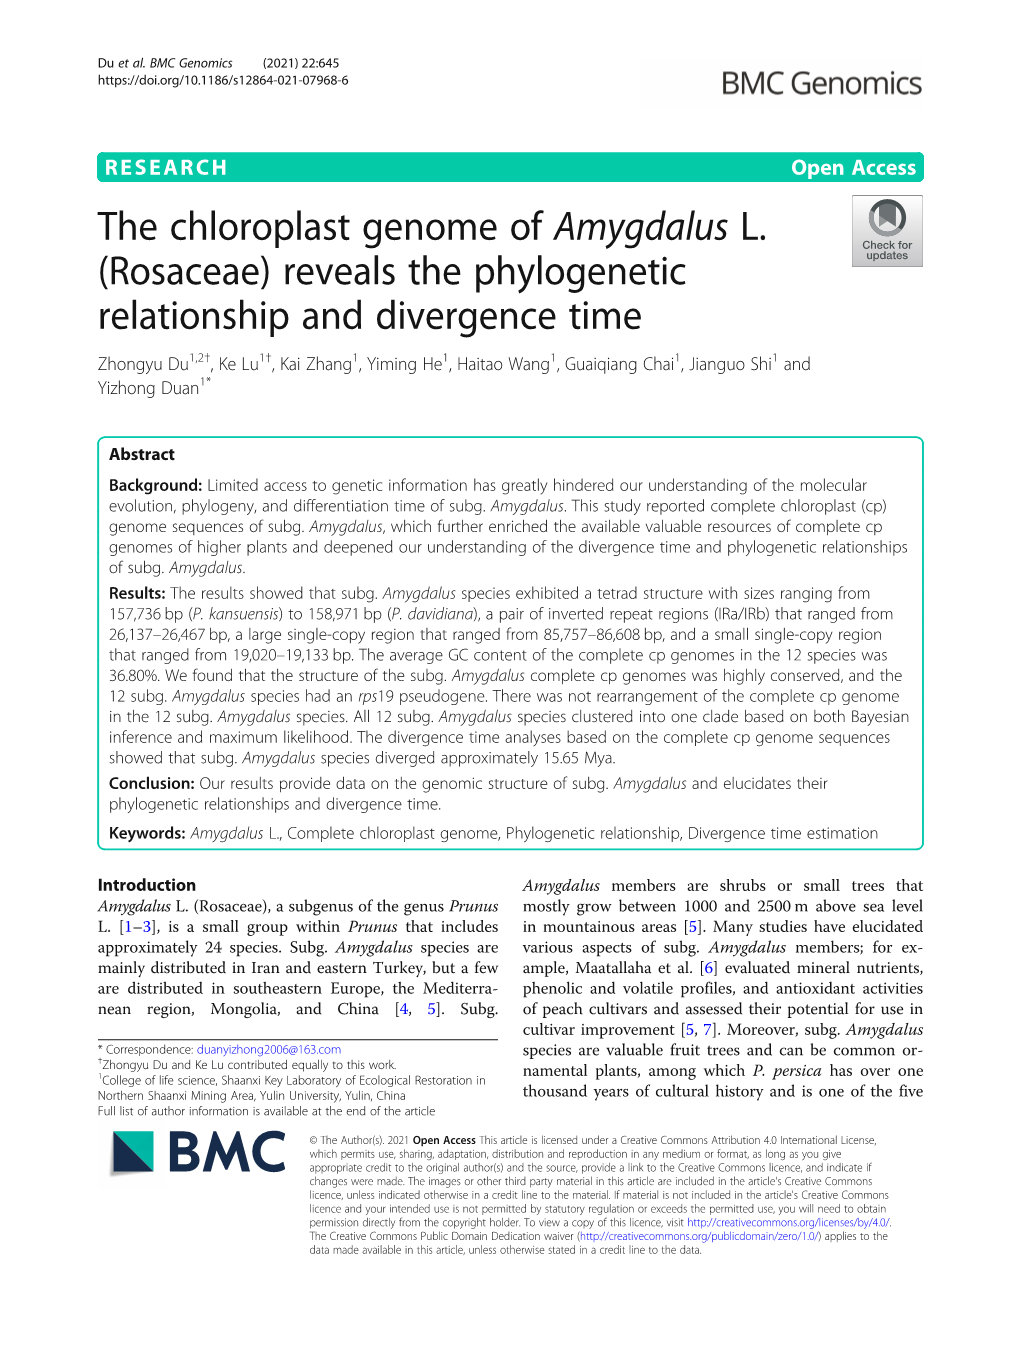 (Rosaceae) Reveals the Phylogenetic Relationship and Divergence Time